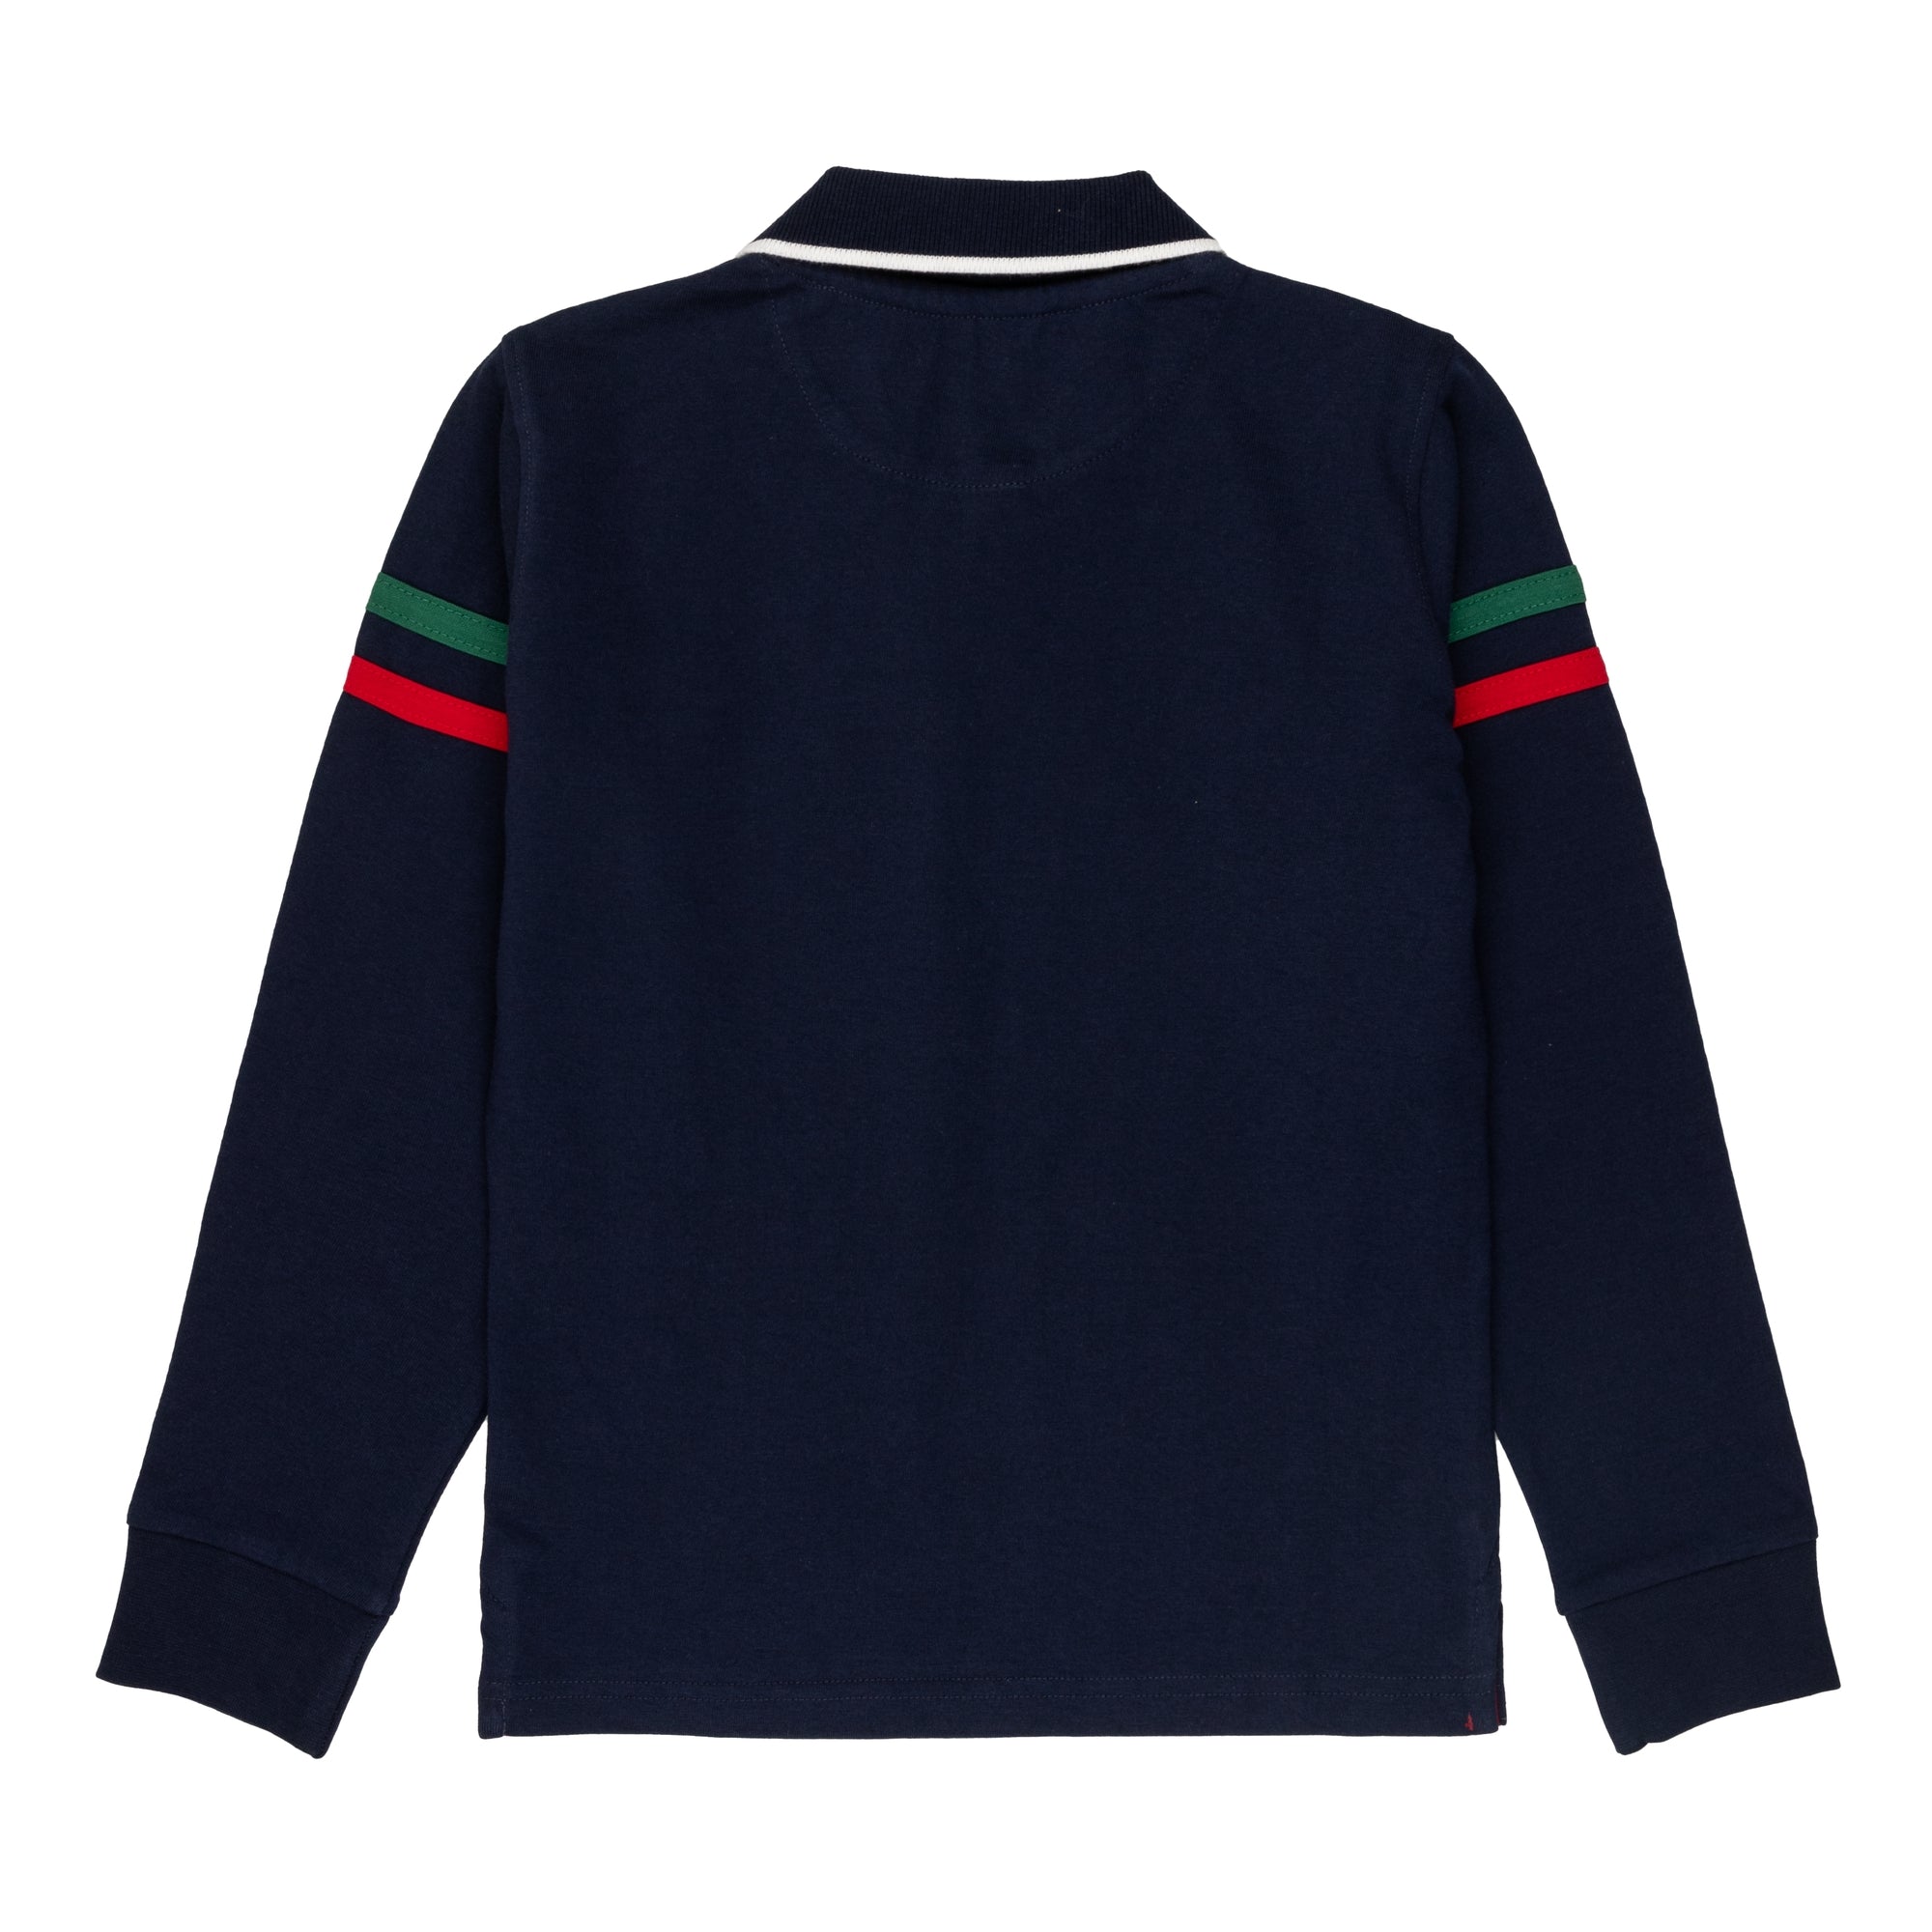 Polo shirt with bands on the sleeves and logo embroidery